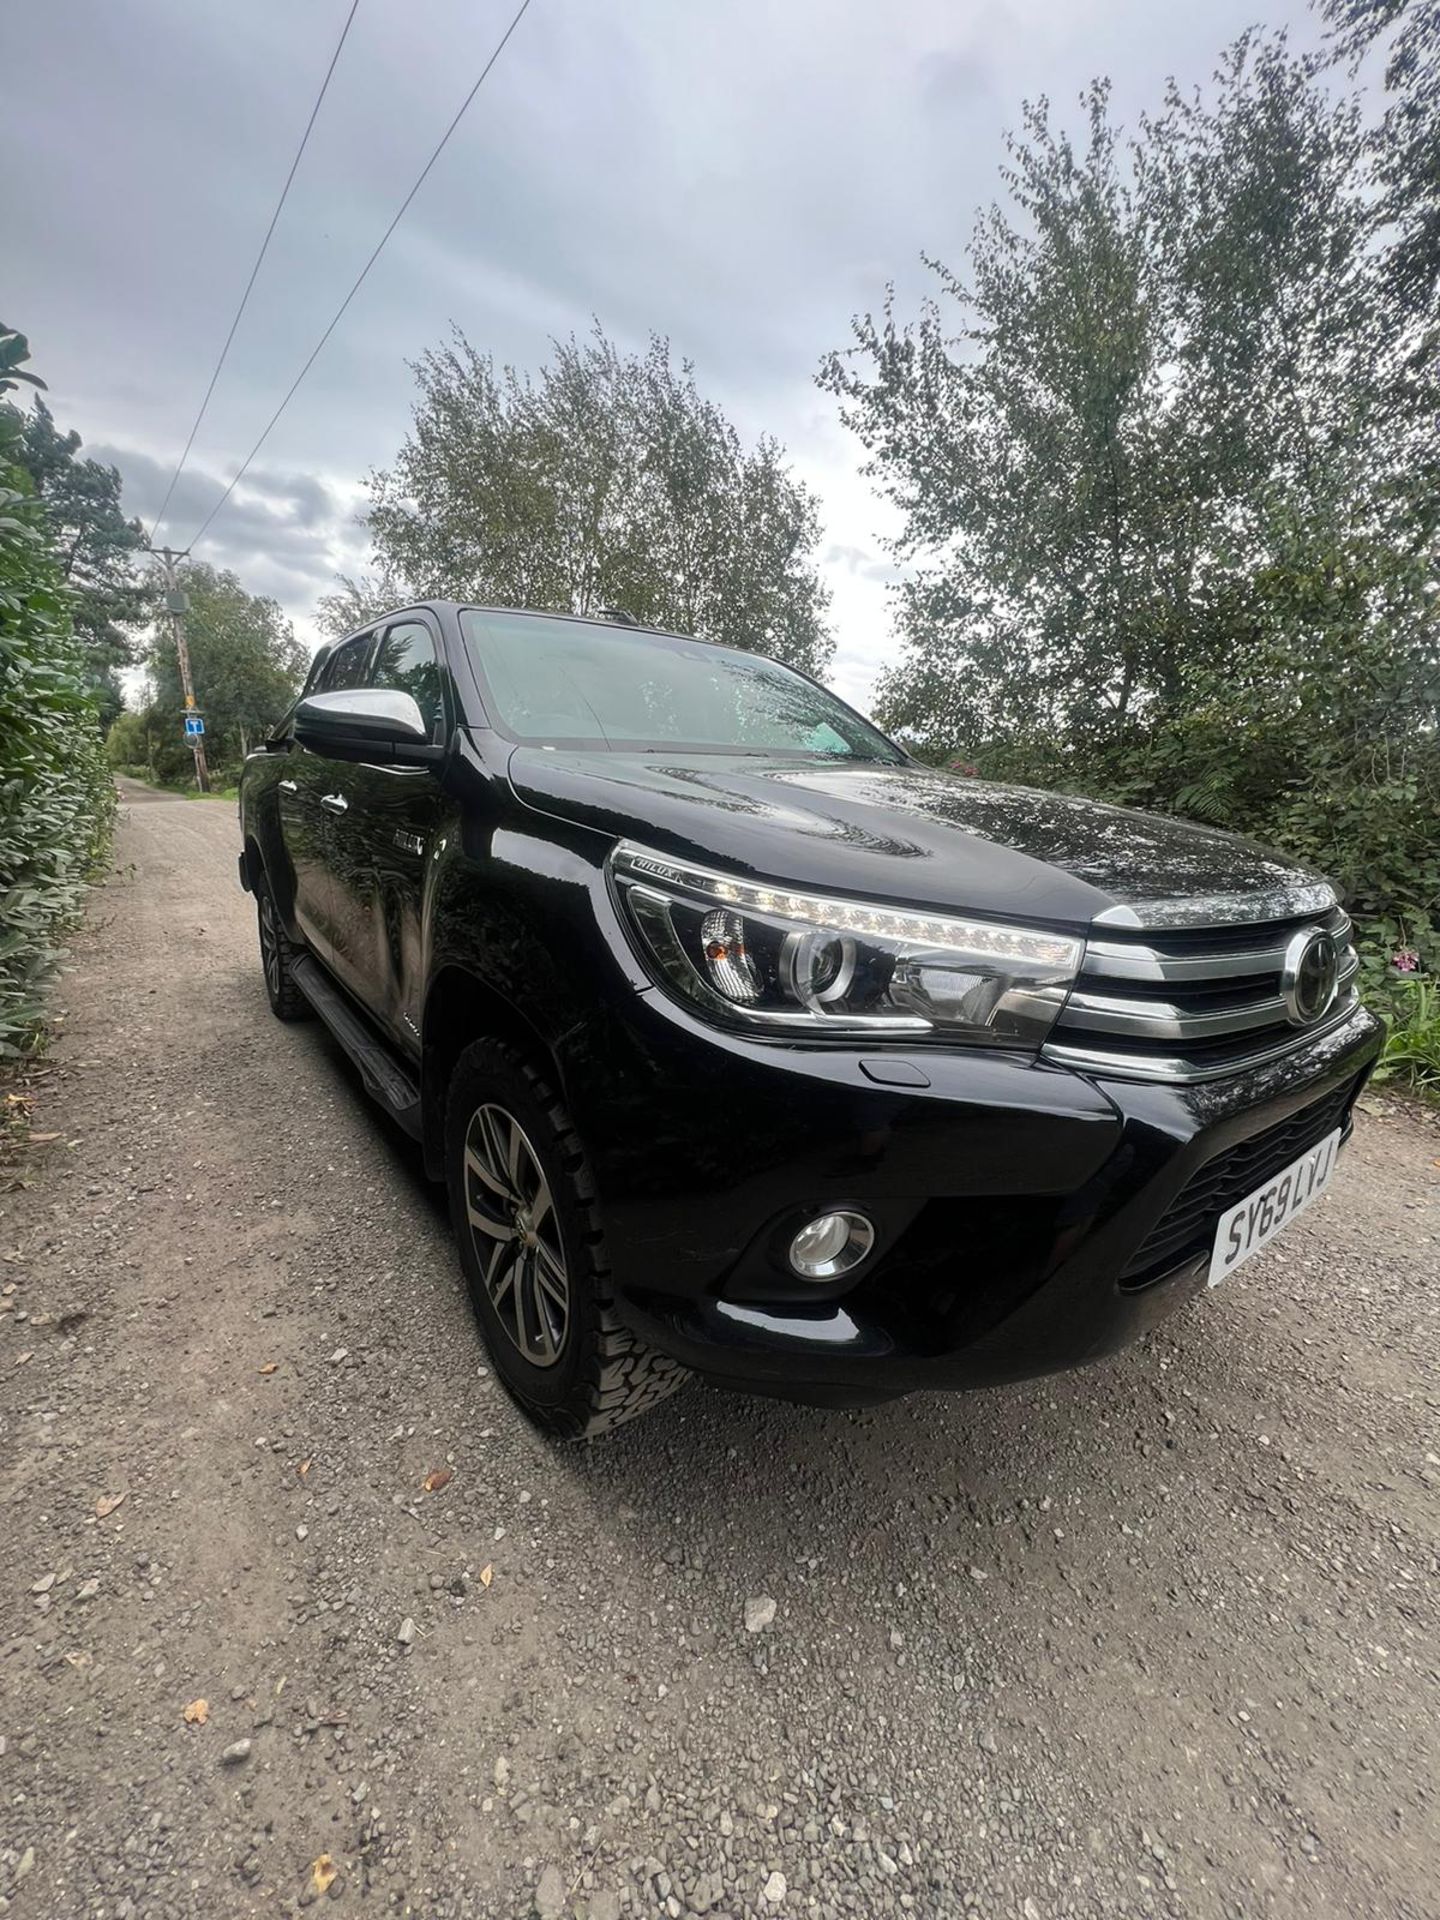 TOYOTA HILUX INVISIBLE 2019 FULL V5 - Image 4 of 15